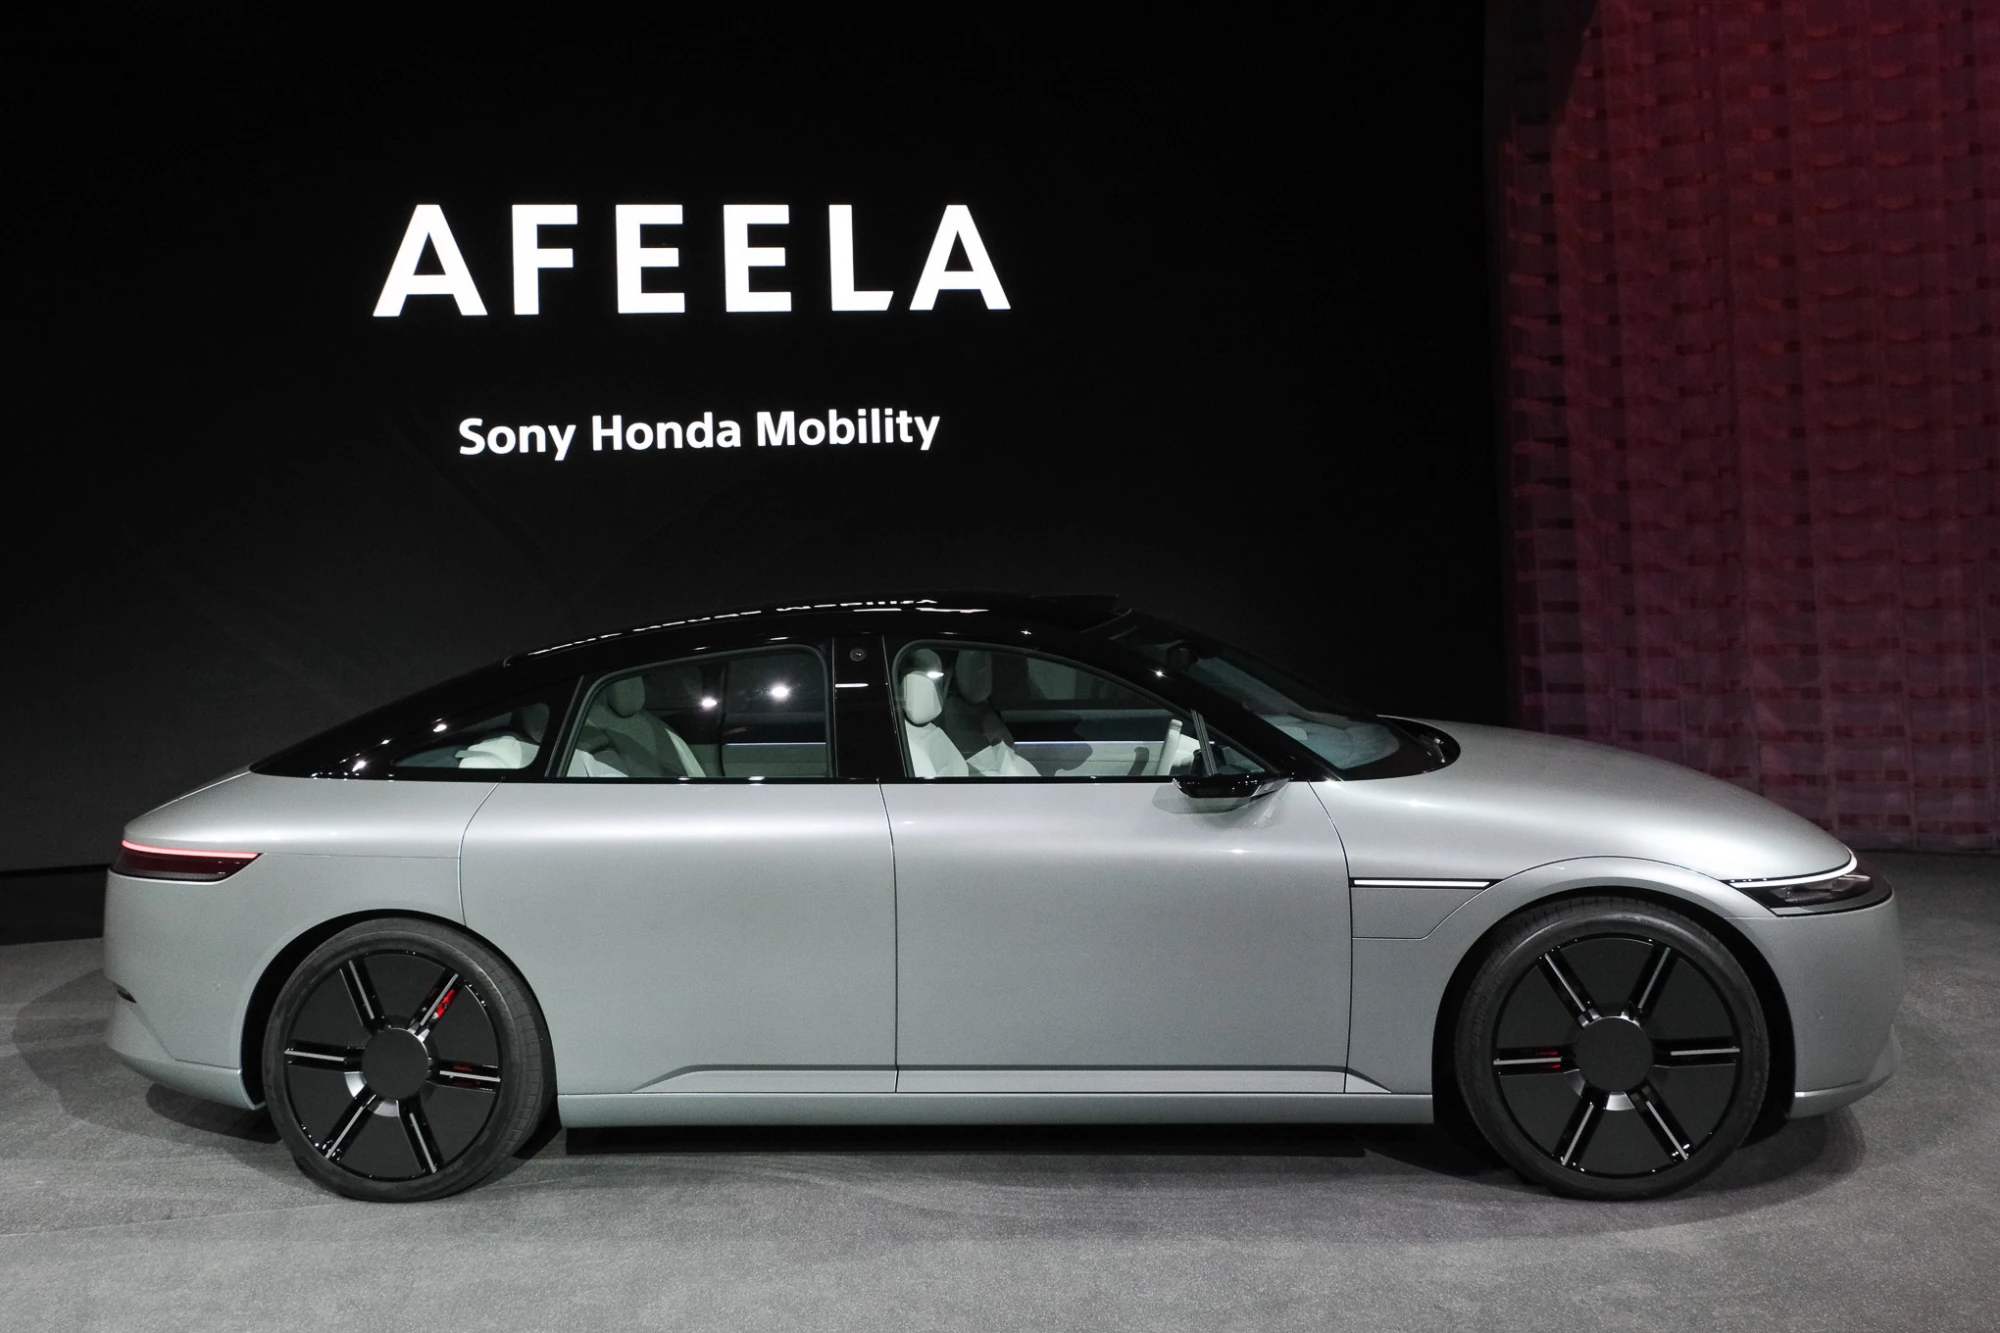 Sony showed a prototype of the Afeela car, which will appear in 2026